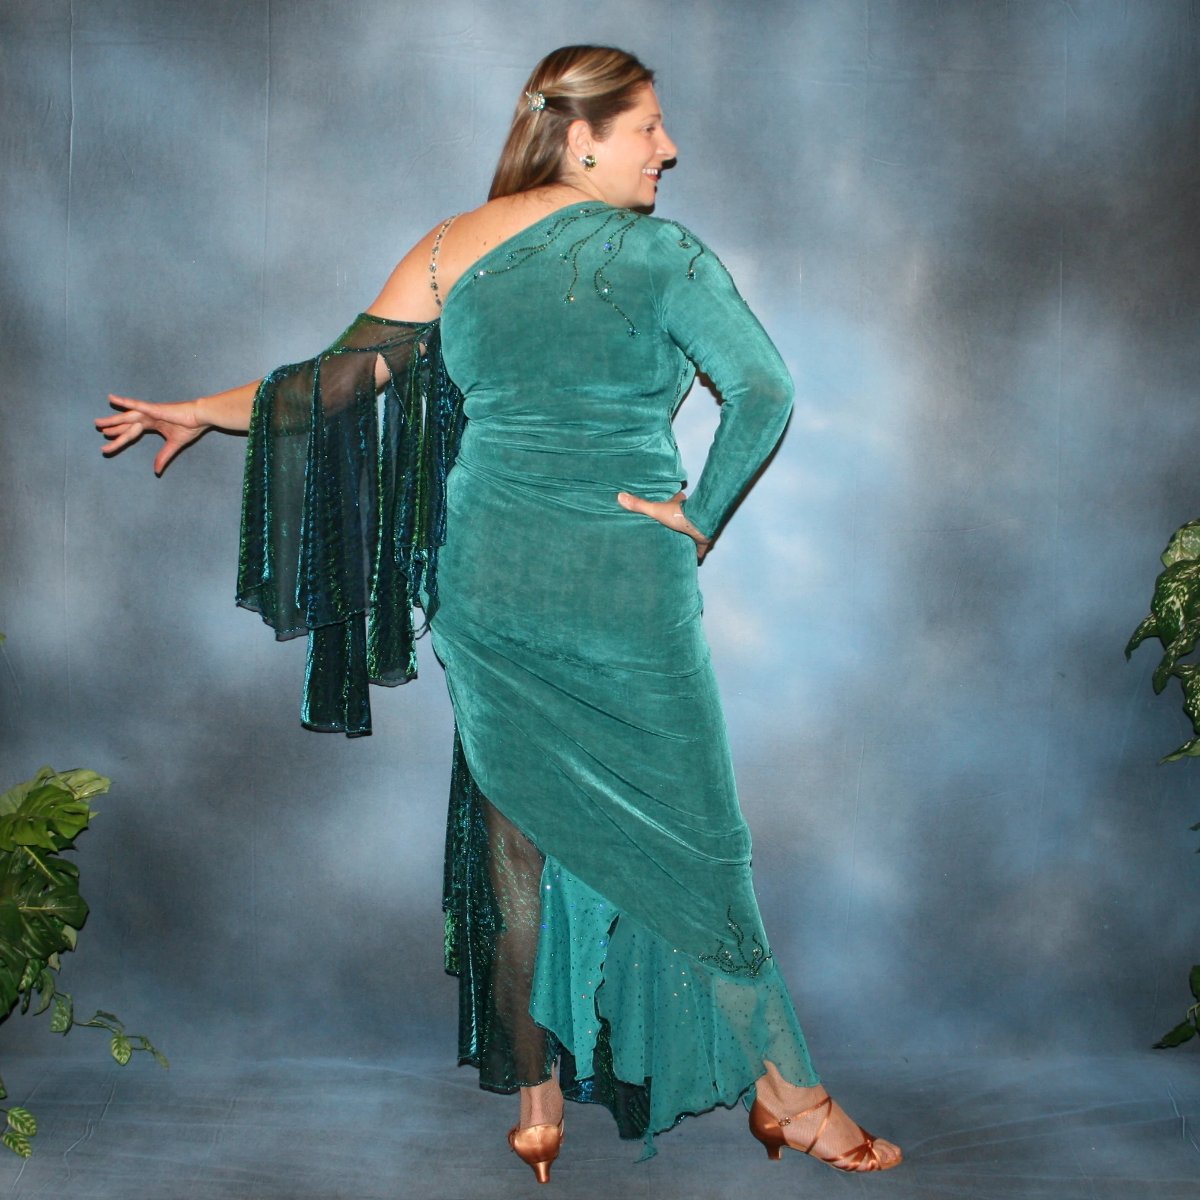 Crystal's Creations back view of Plus size teal Latin/rhythm dress or tango dress was created in luxurious teal solid slinky with iridescent floats & flounces plus a few champagne sequined flounces at bottom skirting. It is embellished with finely detailed Swarovski stonework in blue zircon, blue zircon AB and emerald green